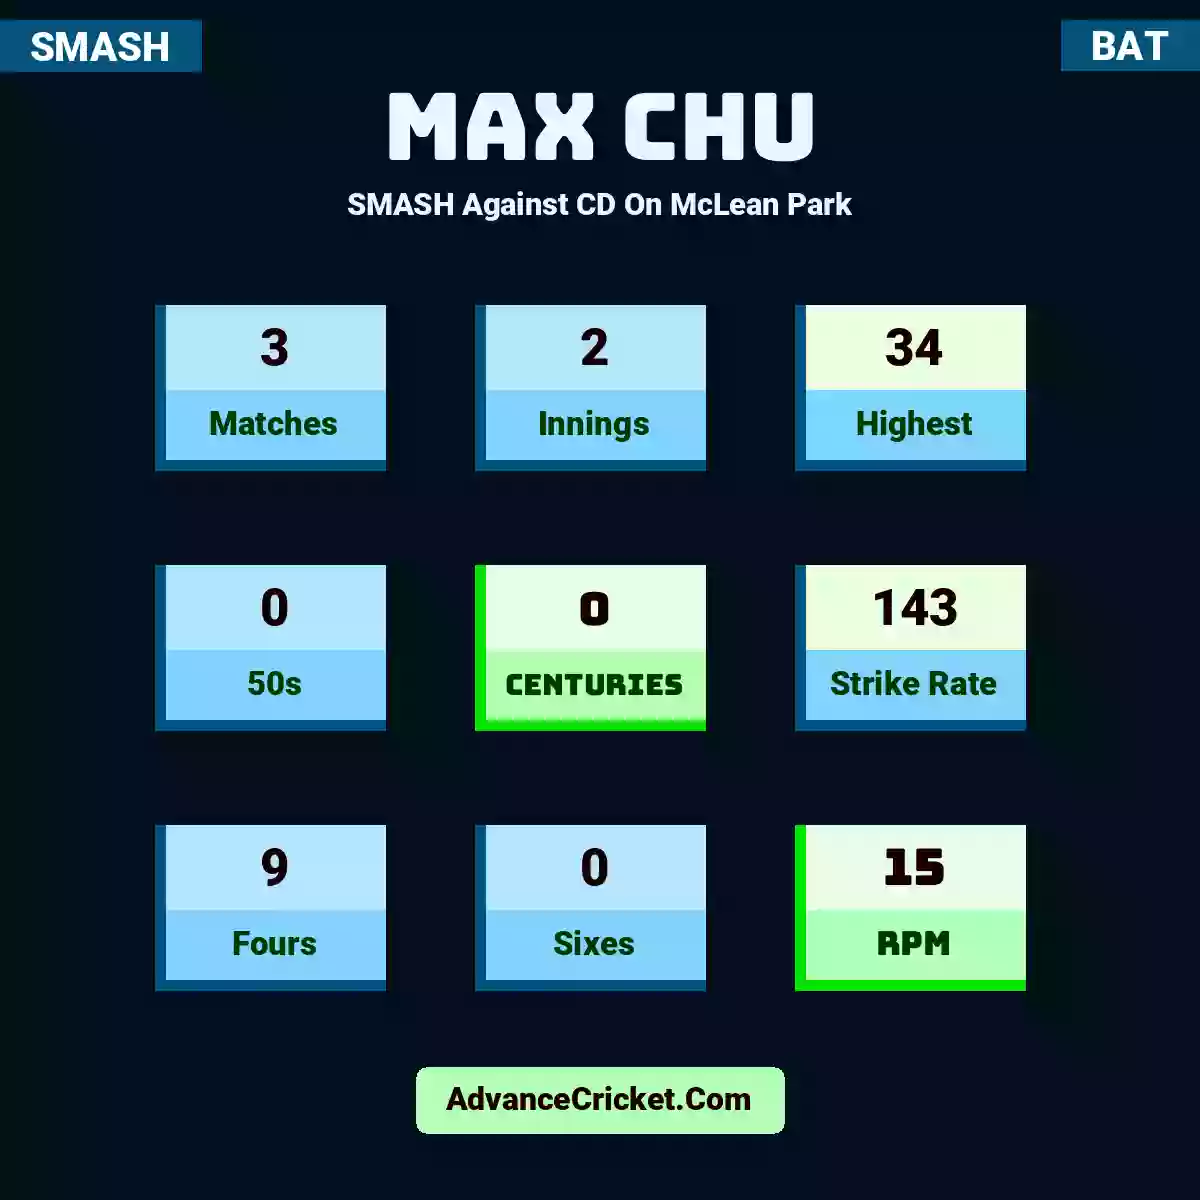 Max Chu SMASH  Against CD On McLean Park, Max Chu played 3 matches, scored 34 runs as highest, 0 half-centuries, and 0 centuries, with a strike rate of 143. M.Chu hit 9 fours and 0 sixes, with an RPM of 15.